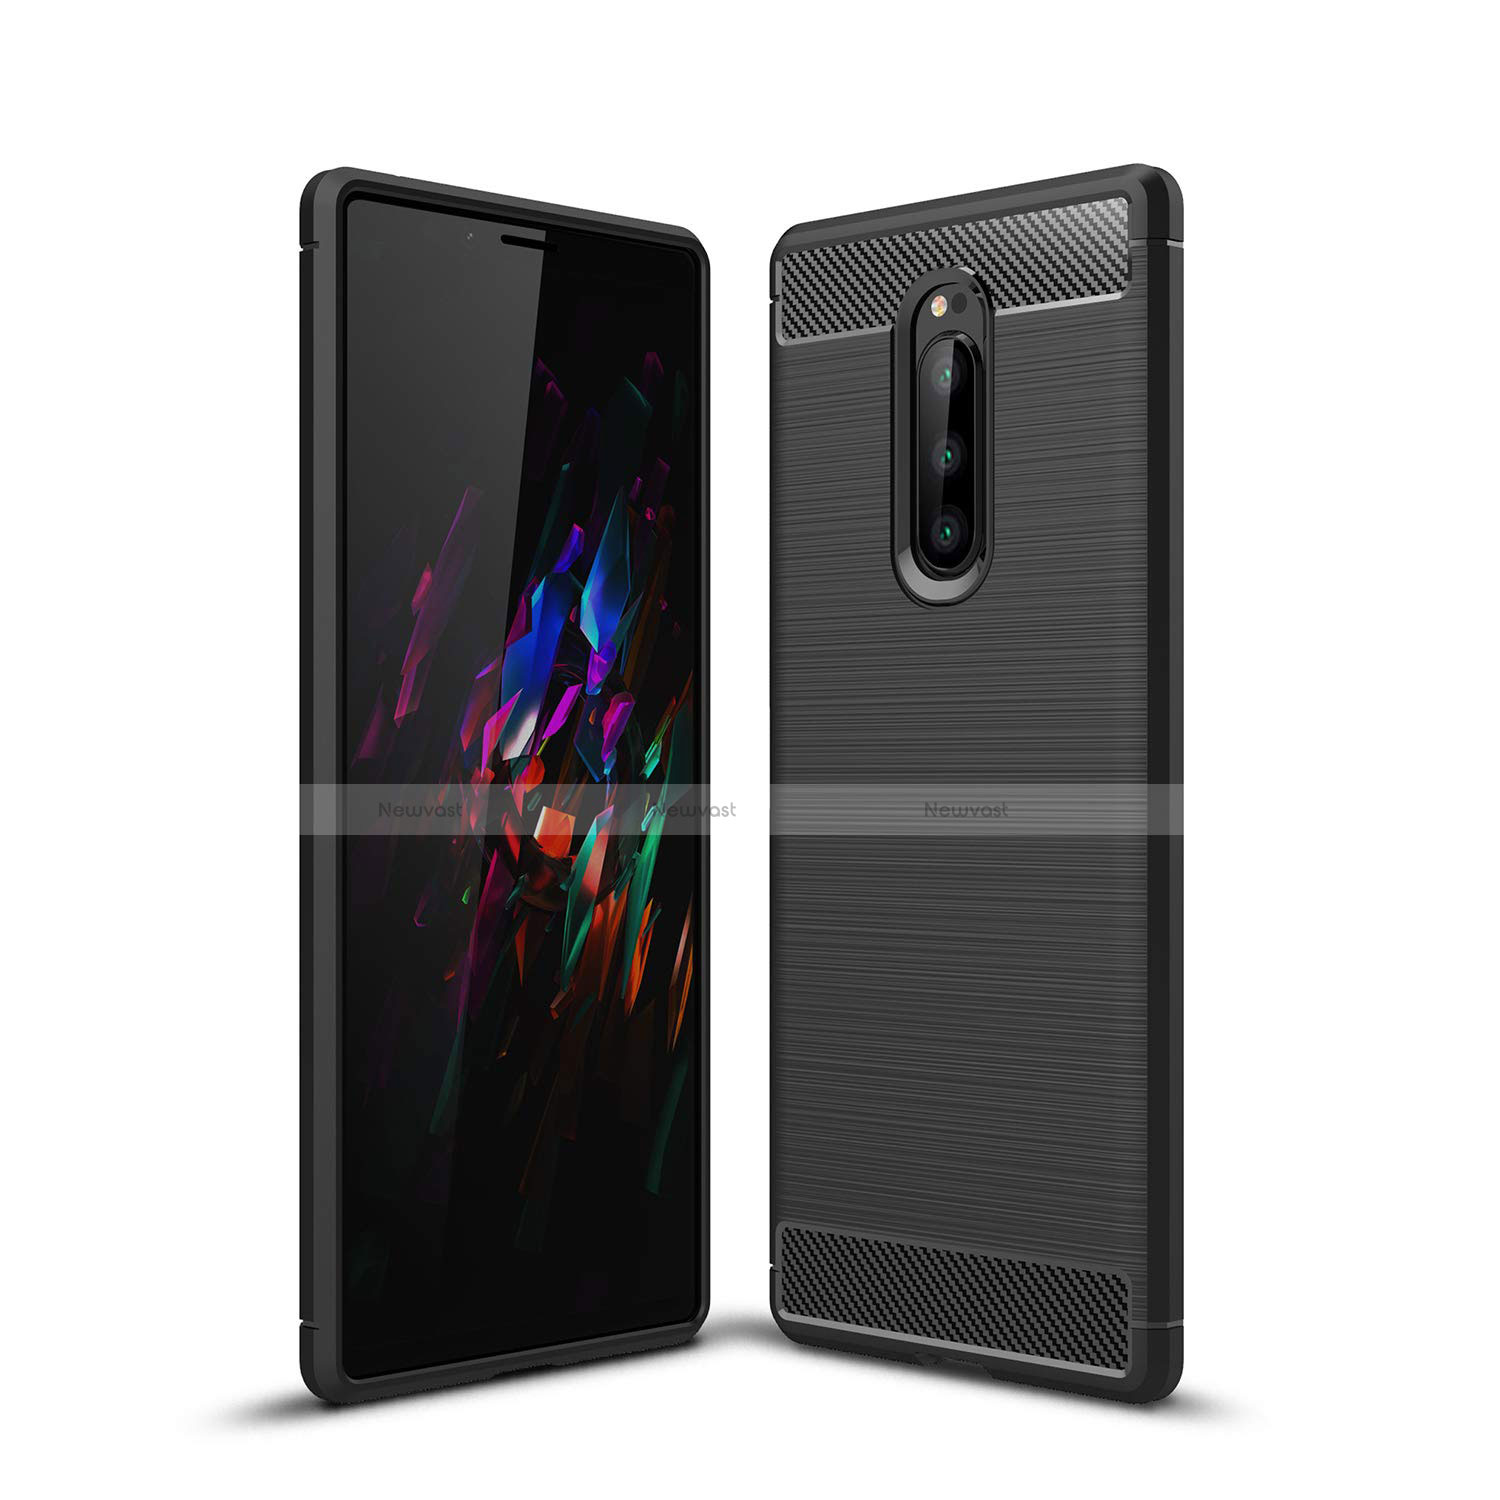 Silicone Candy Rubber TPU Twill Soft Case Cover for Sony Xperia 1 Black